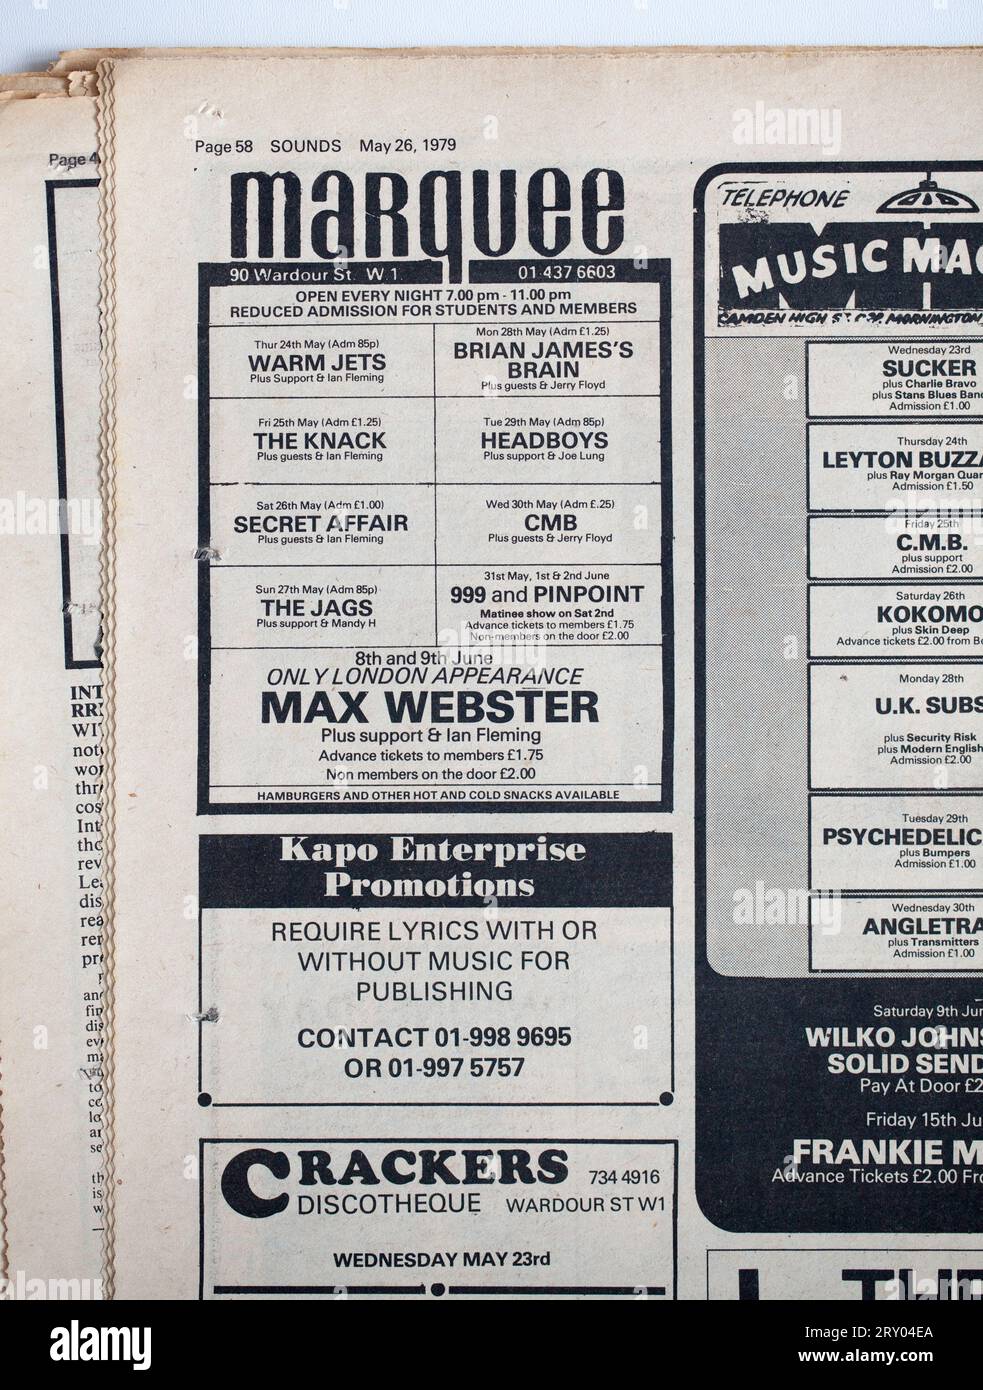 Concert Advertising in 1970s copy of SOUNDS Music Paper Stock Photo